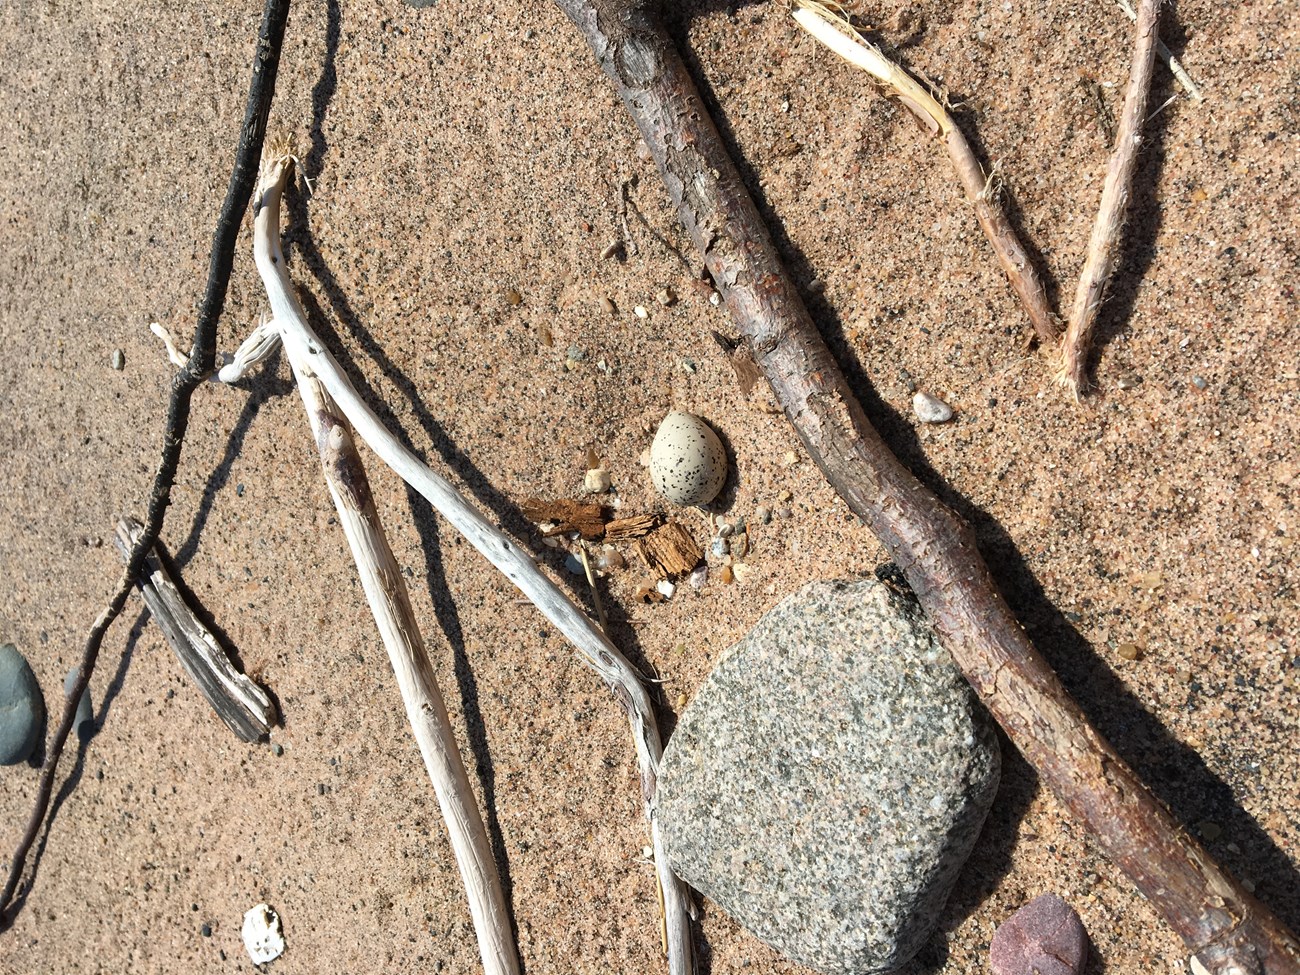 Small speckled egg sits among rocks and sticks on sand beach.